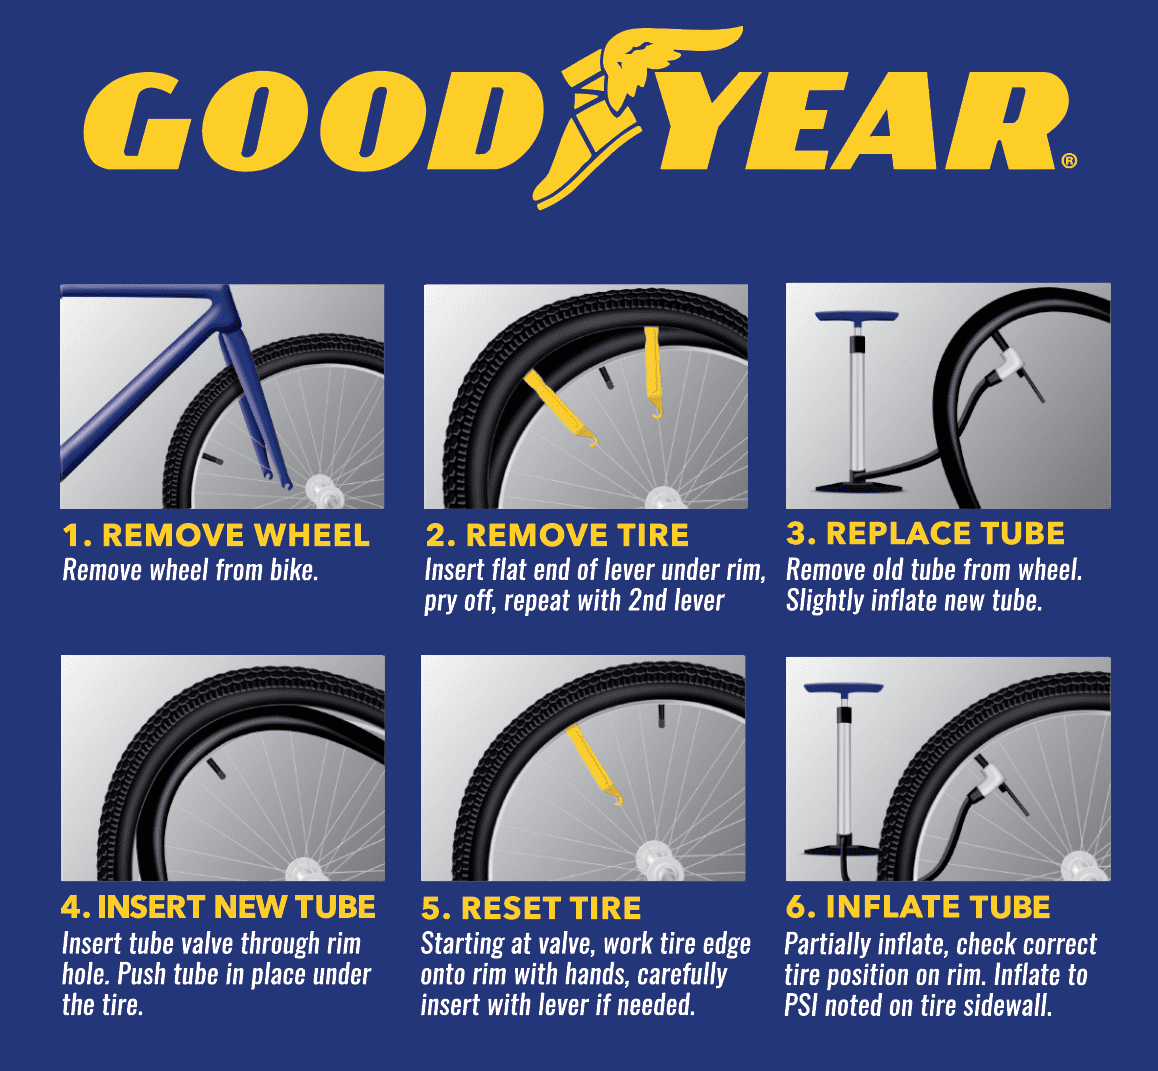 1.75-2.125 Goodyear Presta Valve System Bicycle Tube 29 Inch Free Shipping 